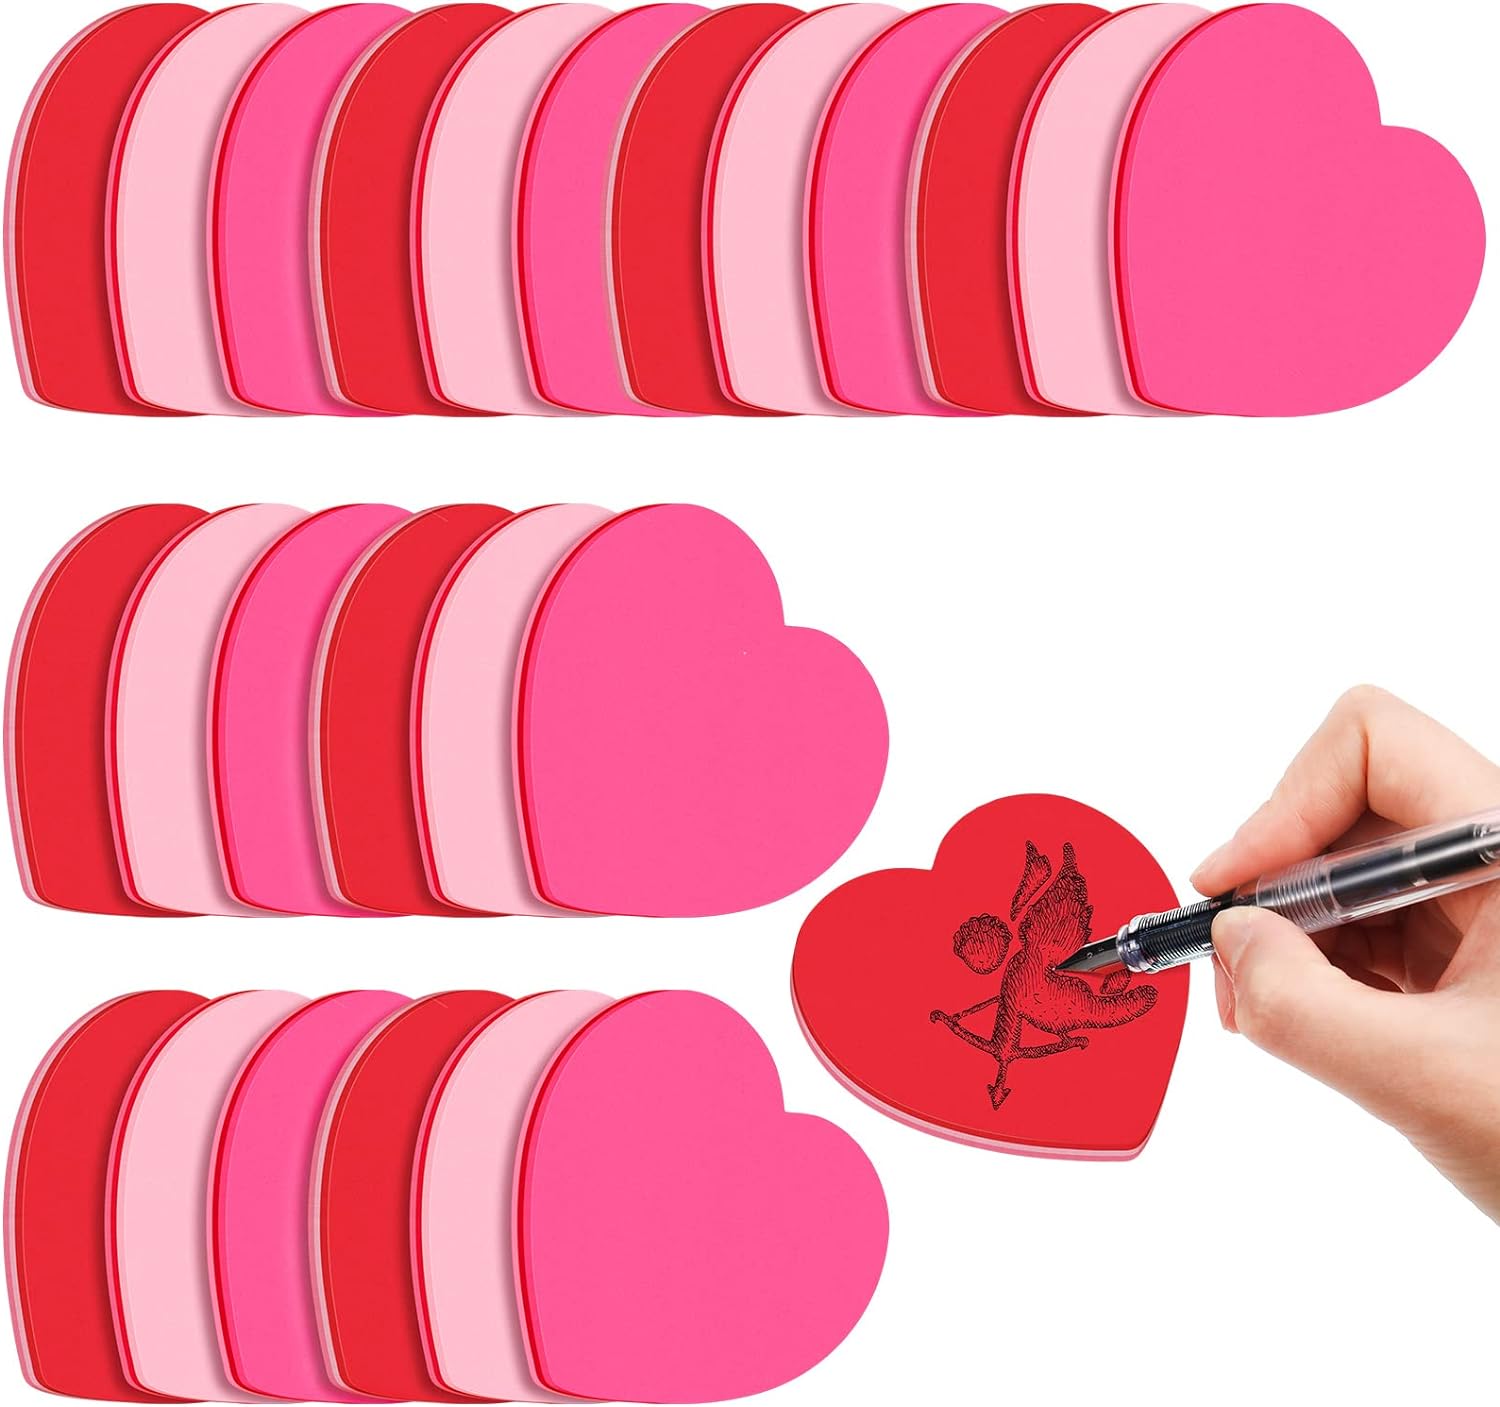 720 Sheets Heart Shaped Sticky Notes 3 x 3 Inch Mixed 3 Color Sticky Memo Funny Self Stick Colorful Cute Note Pads Removable Easy to Post for Office School Home Business Girls Women Valentine' Day